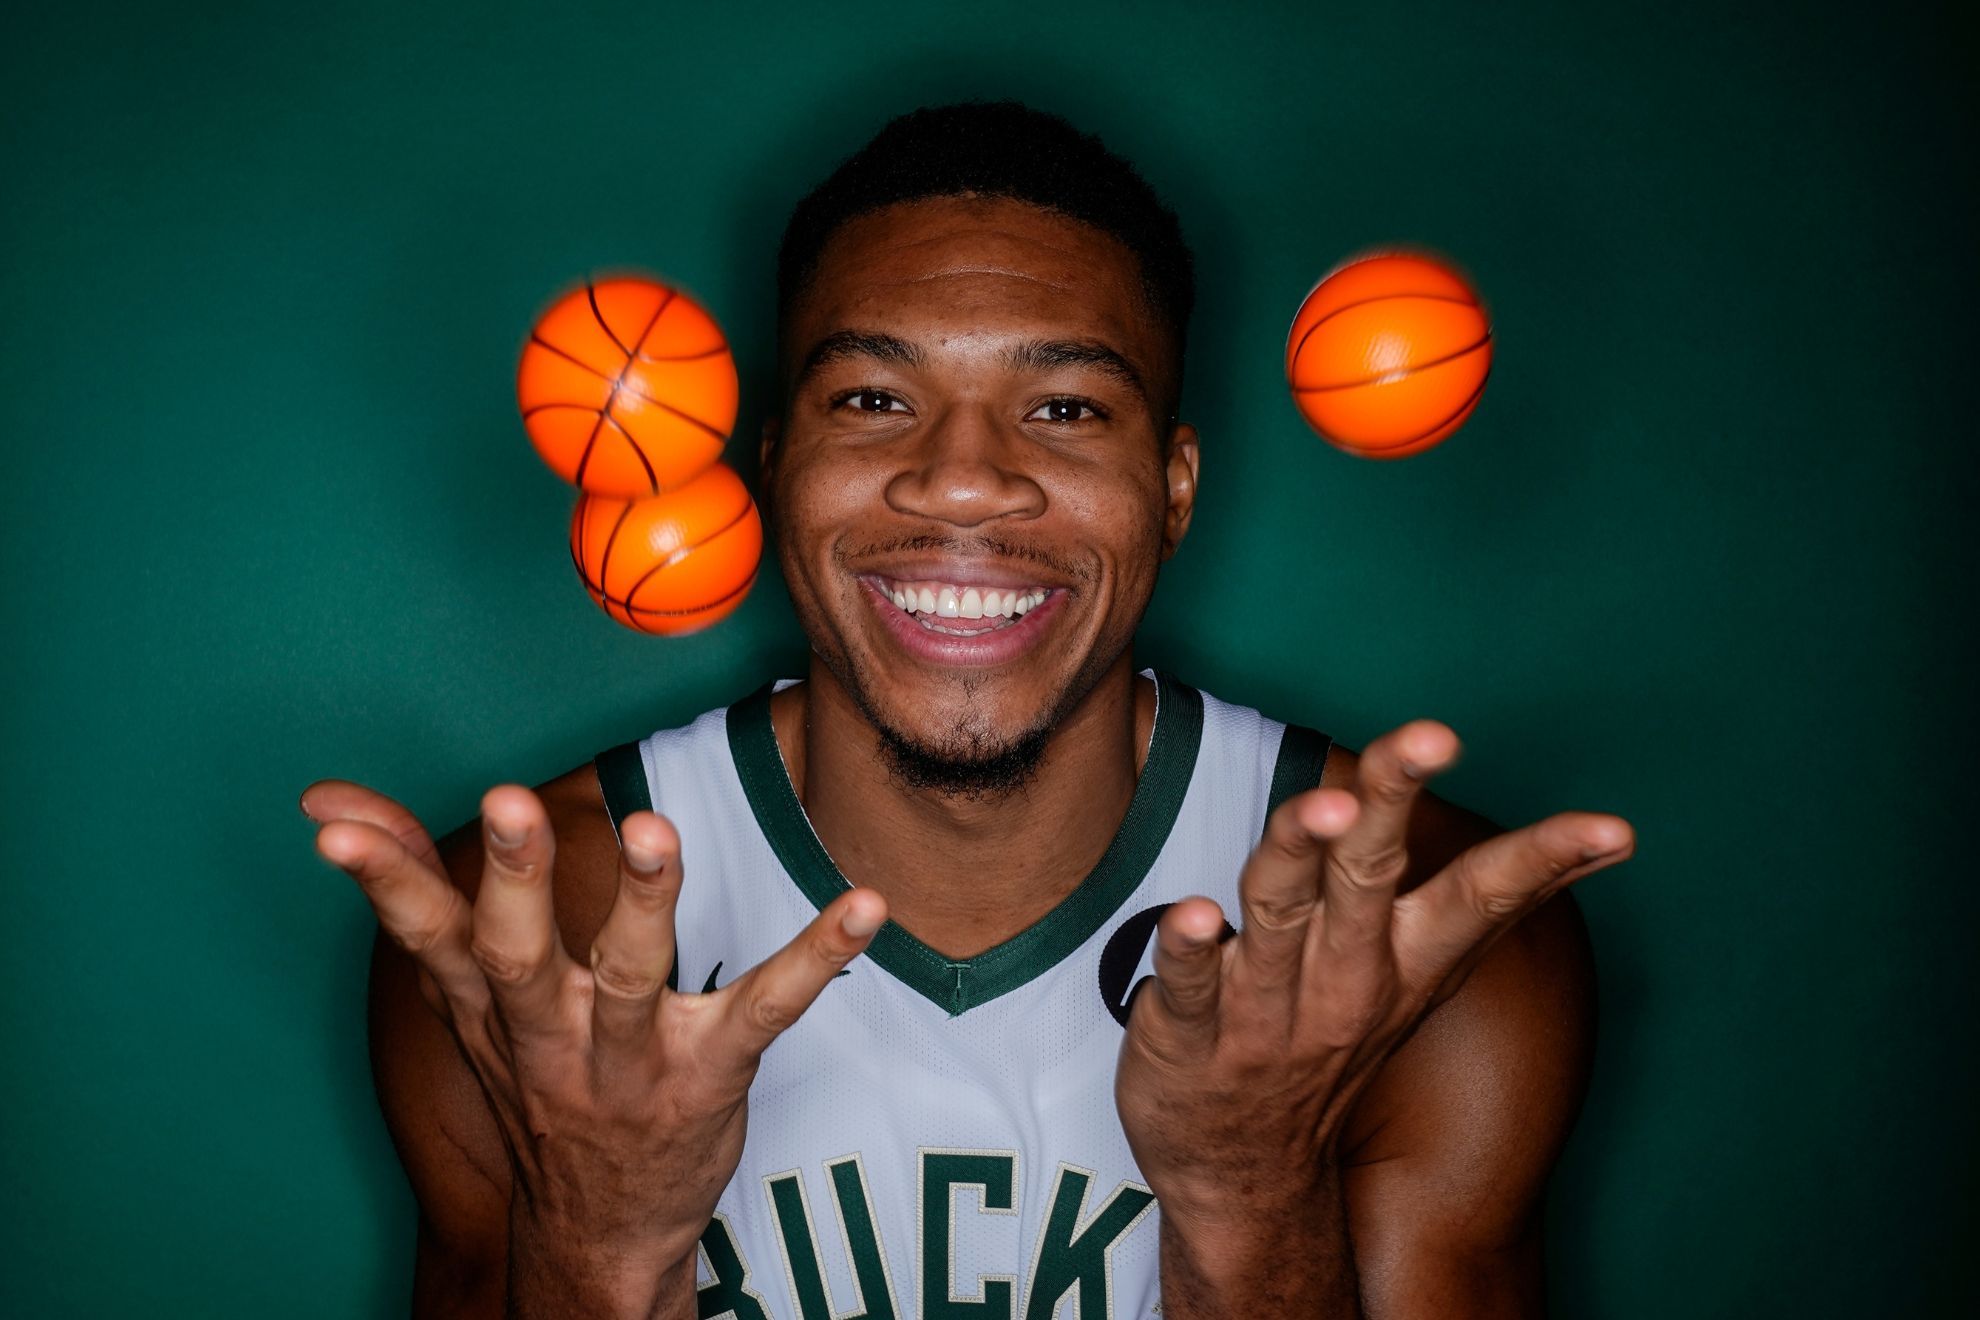 Giannis Antetokounmpo signs contract extension with Bucks, per report